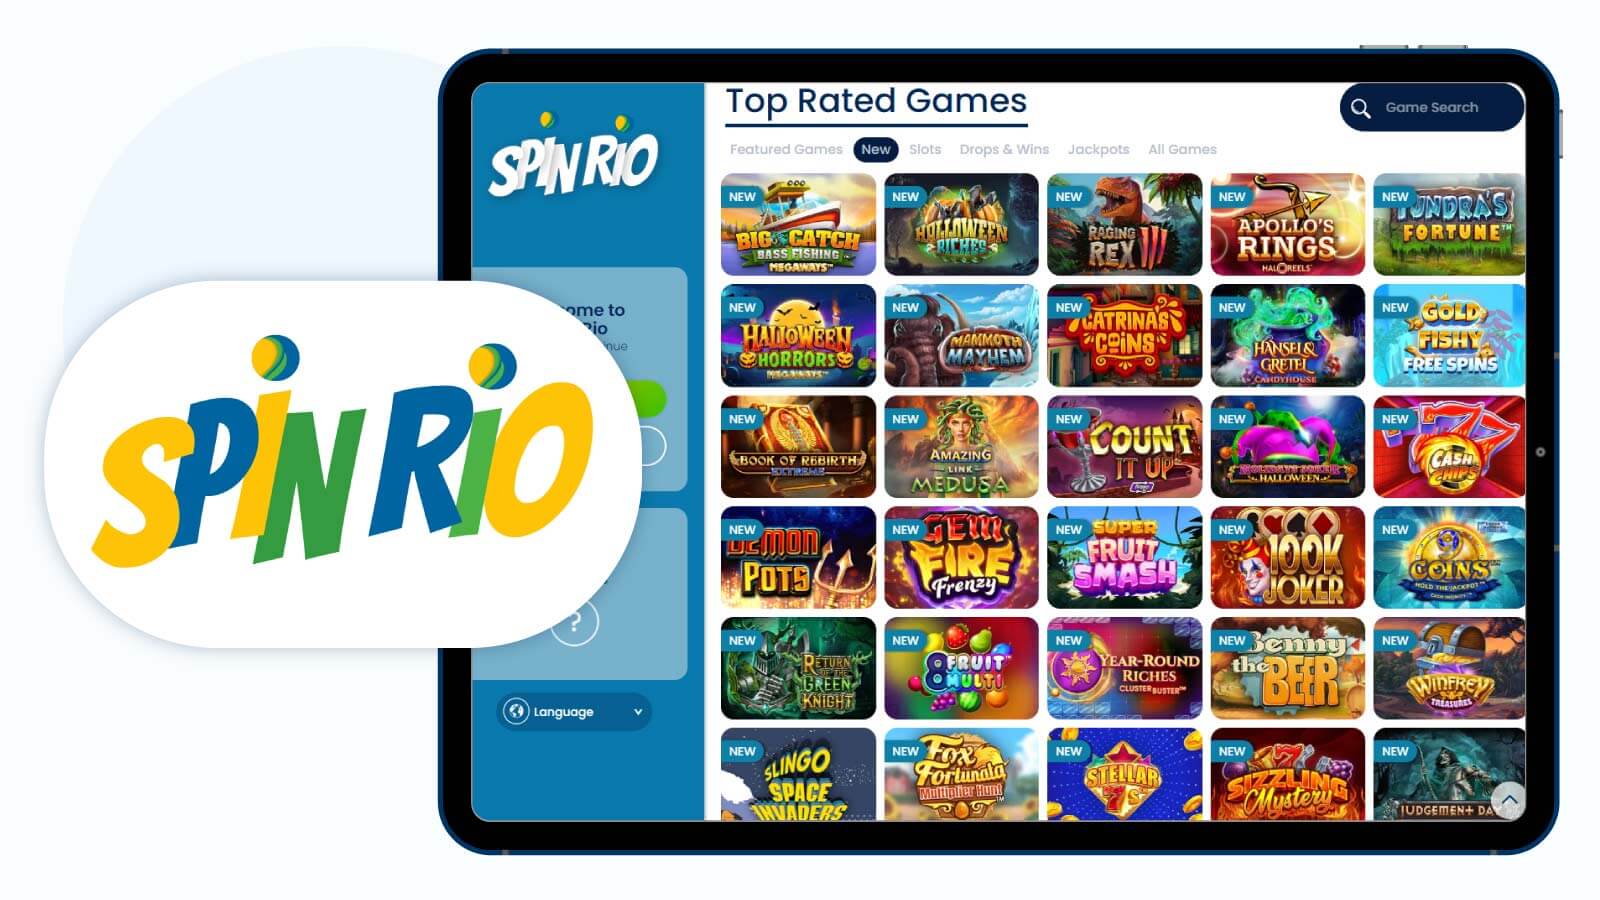 150% Up To £40 + 75 Extra Spins at Spin Rio Casino